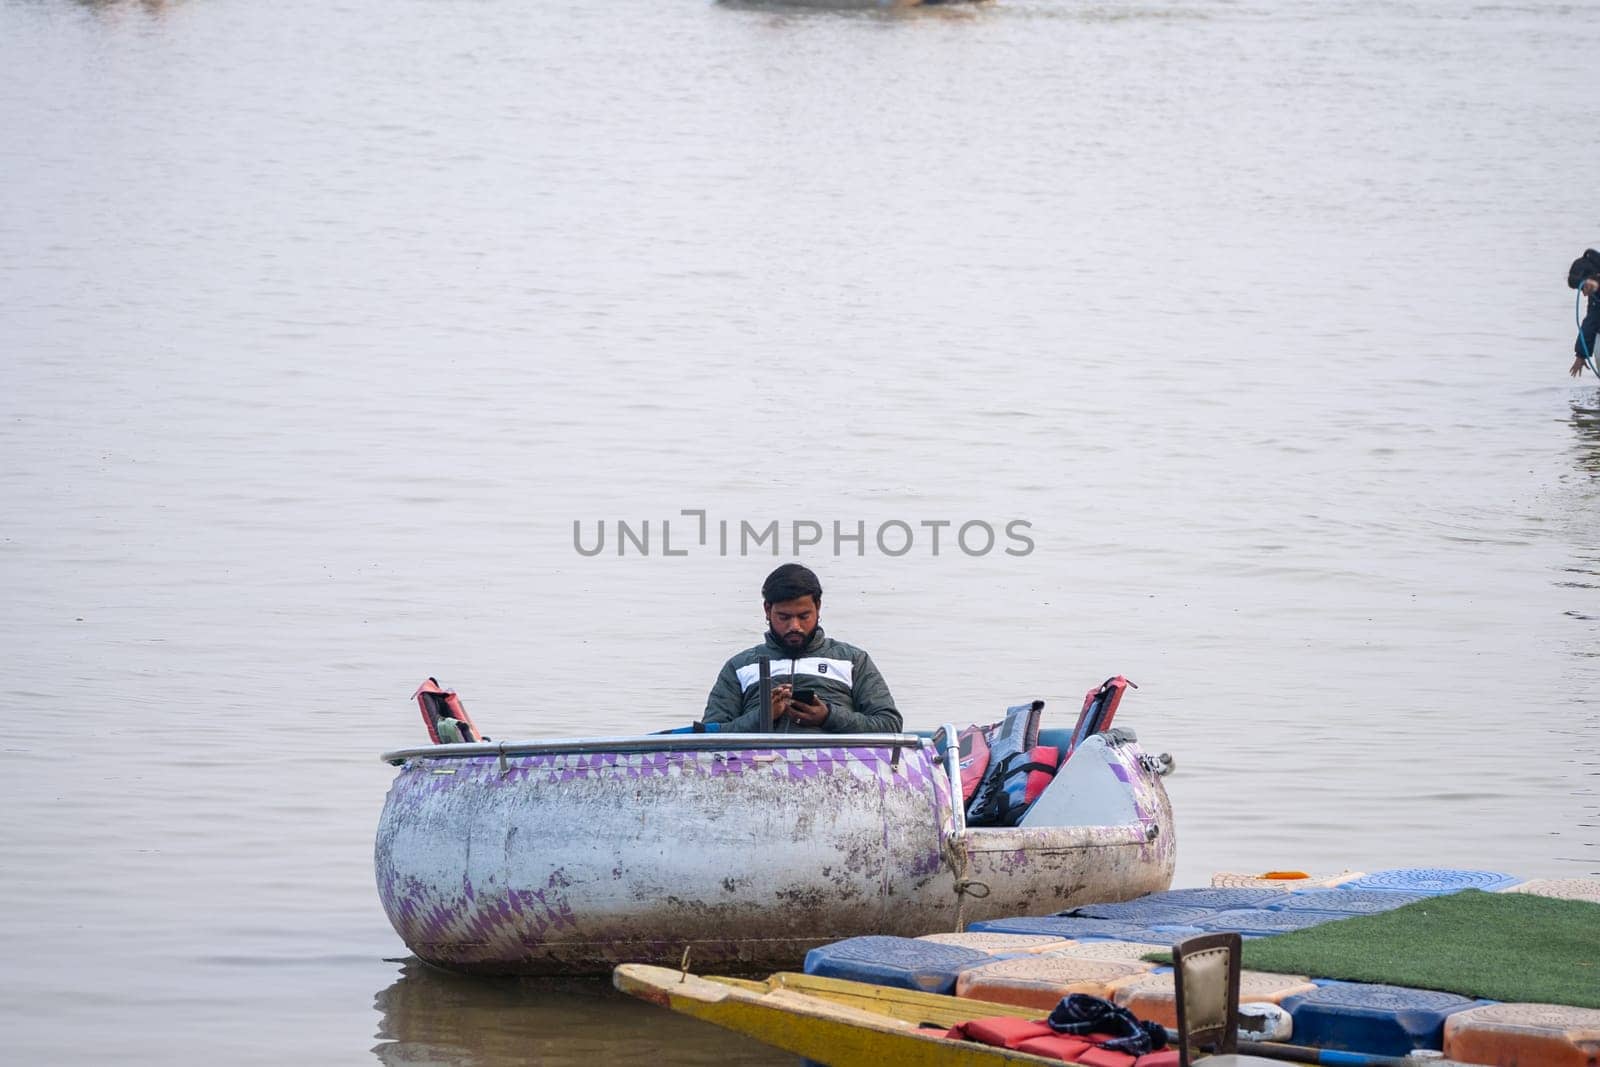 couple enjoying a pedal boat decorated beautifully on the landmark sukhna lake in chandigarh with more boats in the distance showing this popular tourist spot by Shalinimathur